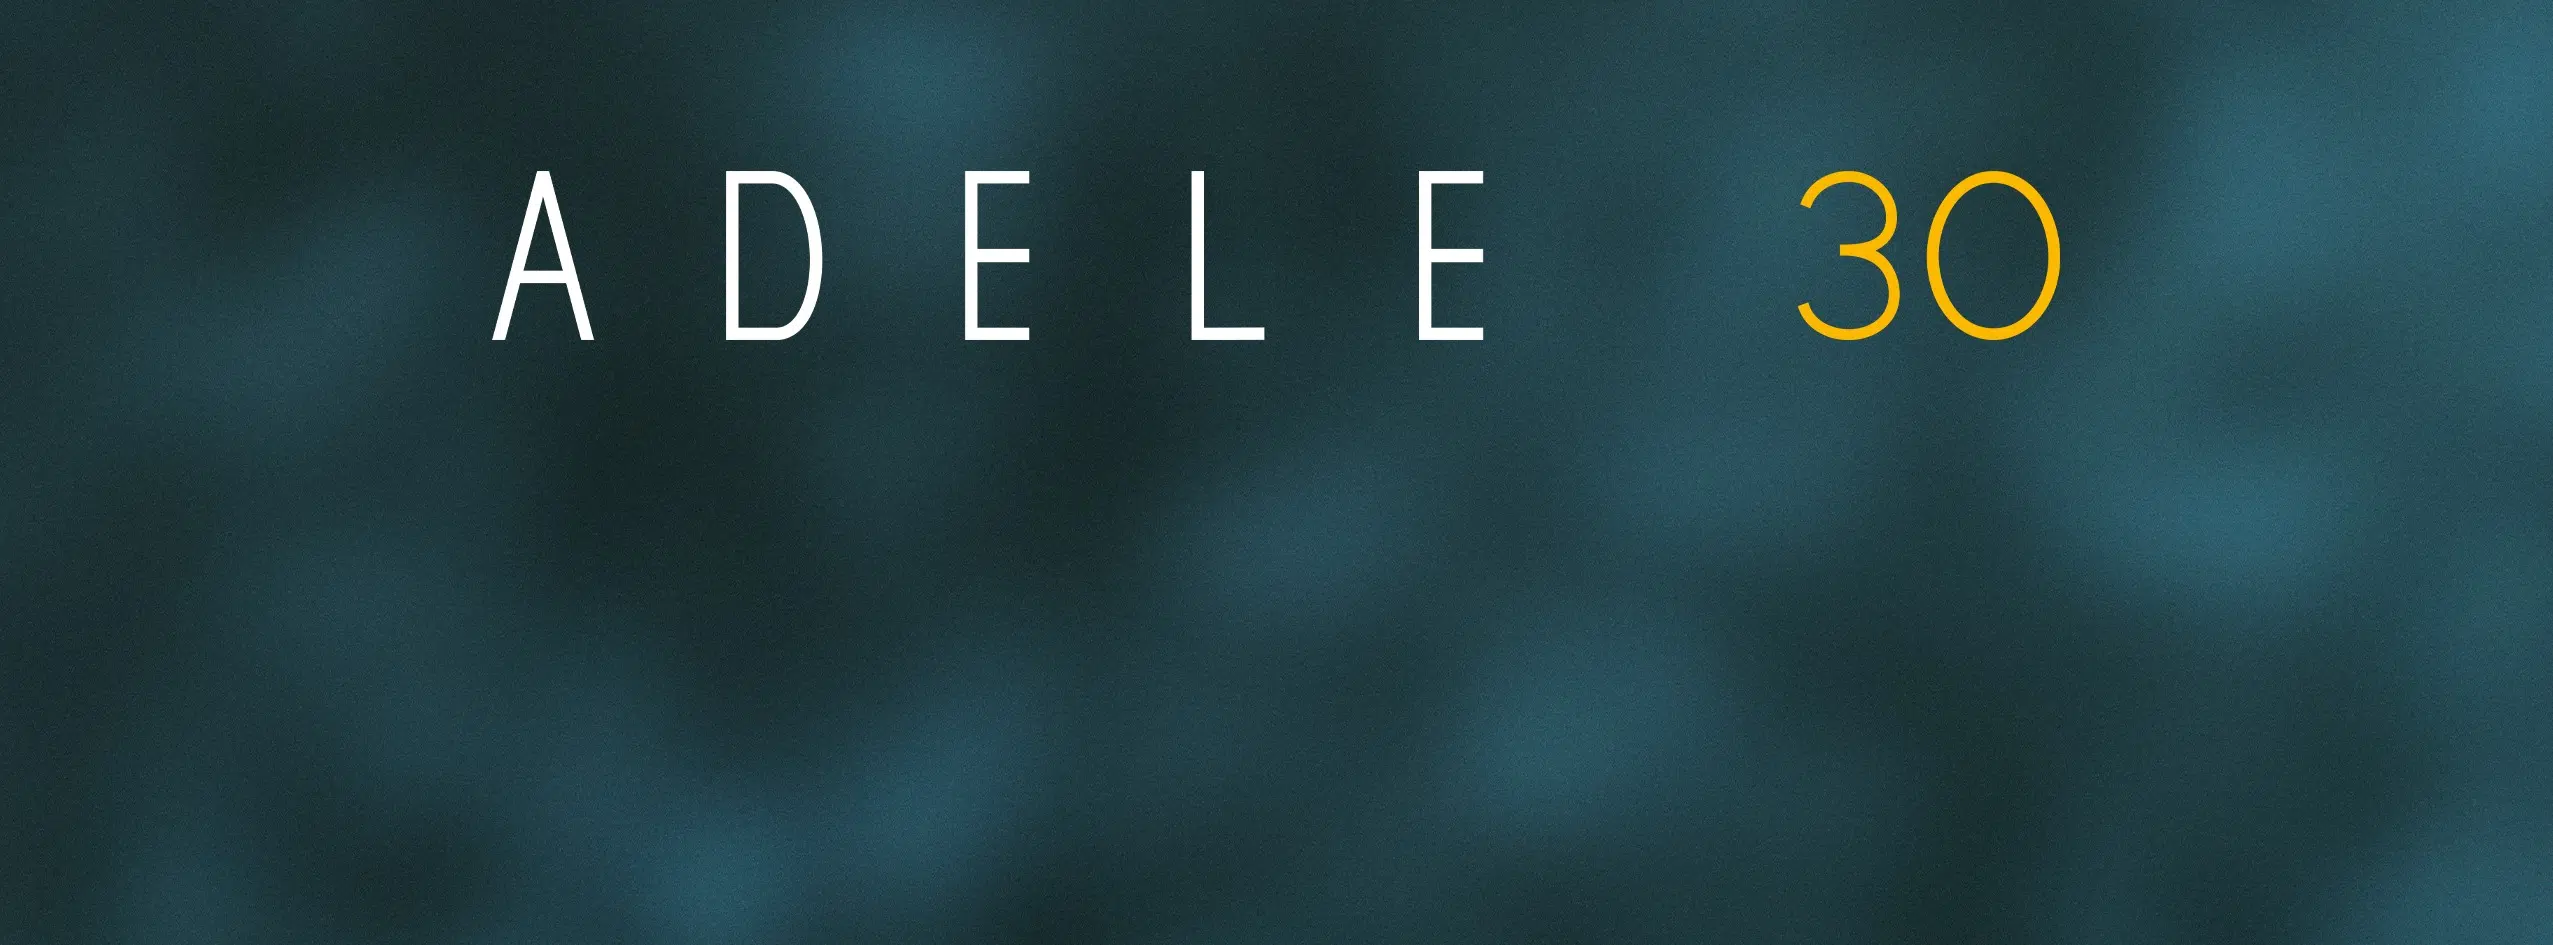 Adele Announces New Album "30" With Release Date